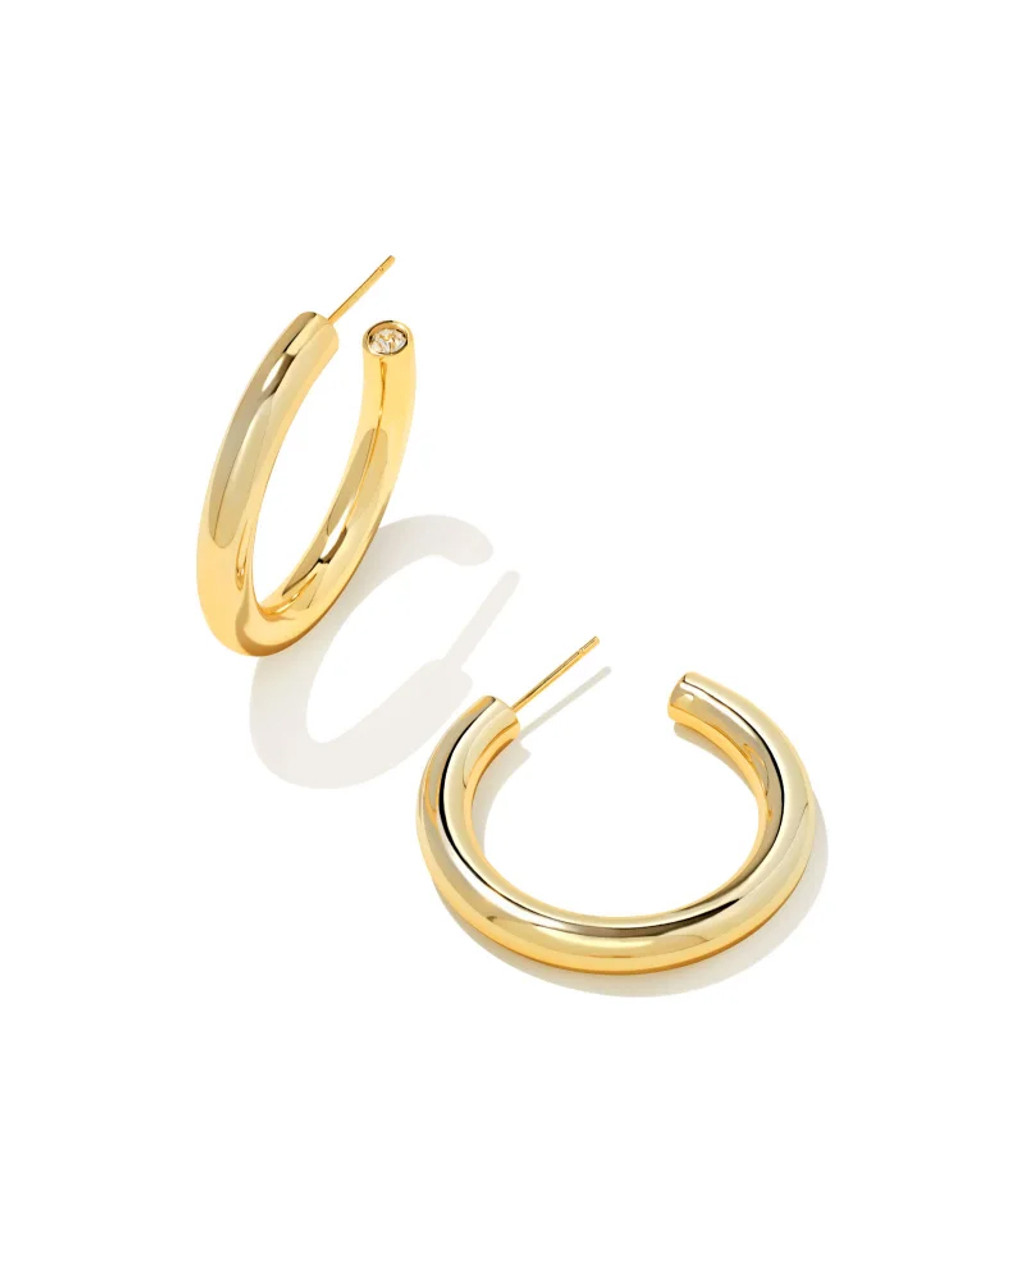 Louise Hoop Earrings Round Form Metal Gold, Gold, One Size